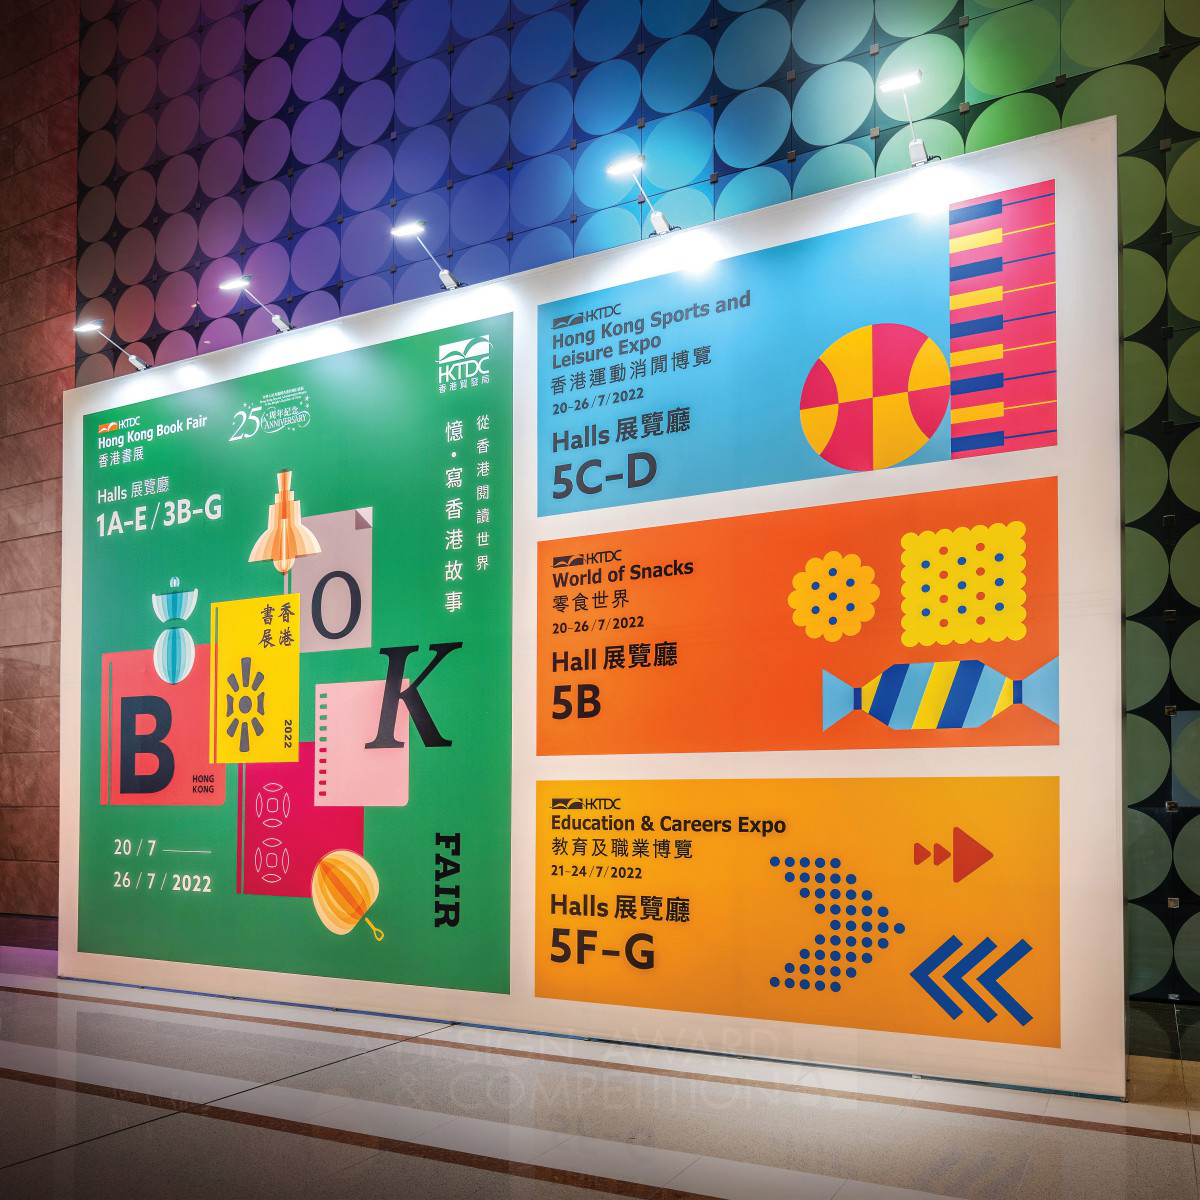 Hong Kong Book Fair 2022 Public Exhibition by Dury Chin Bronze Event and Happening Design Award Winner 2024 